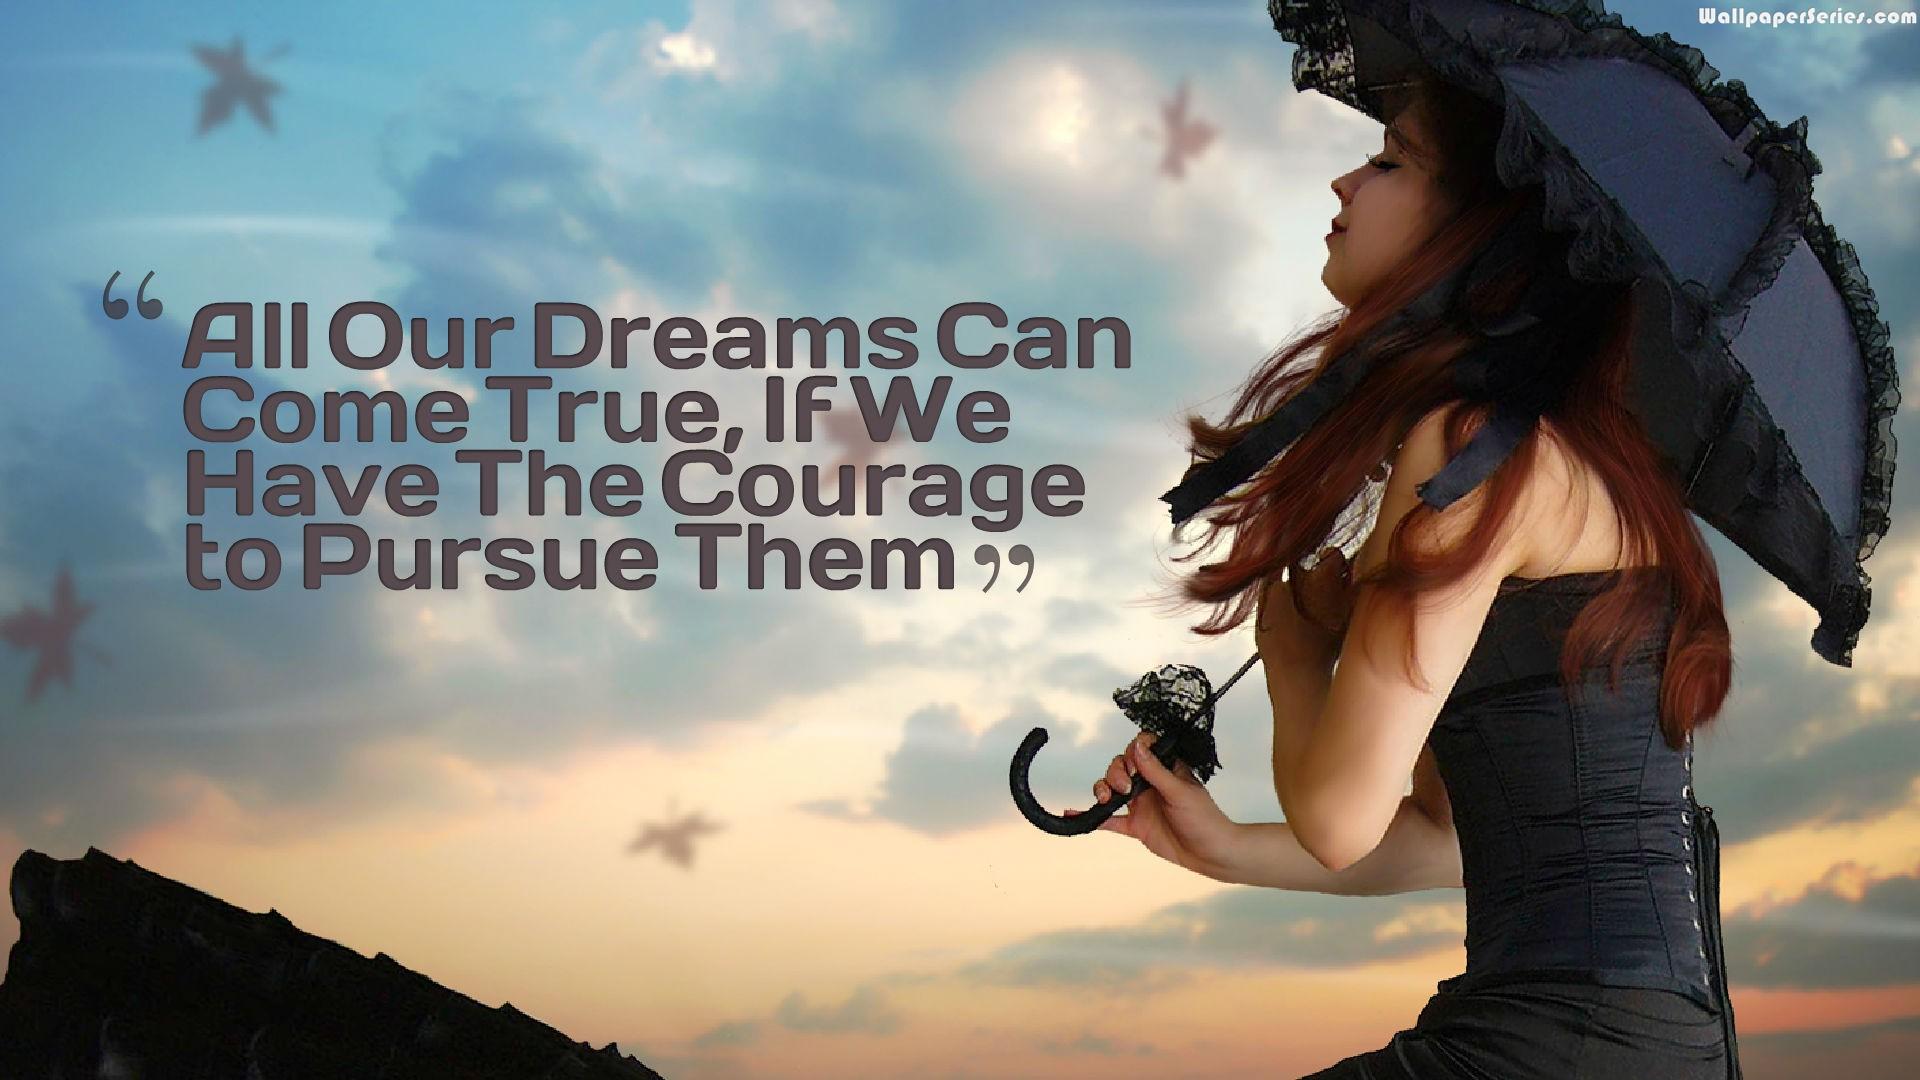 Dream Quotes Wallpaper HD Background, Image, Pics, Photo Free